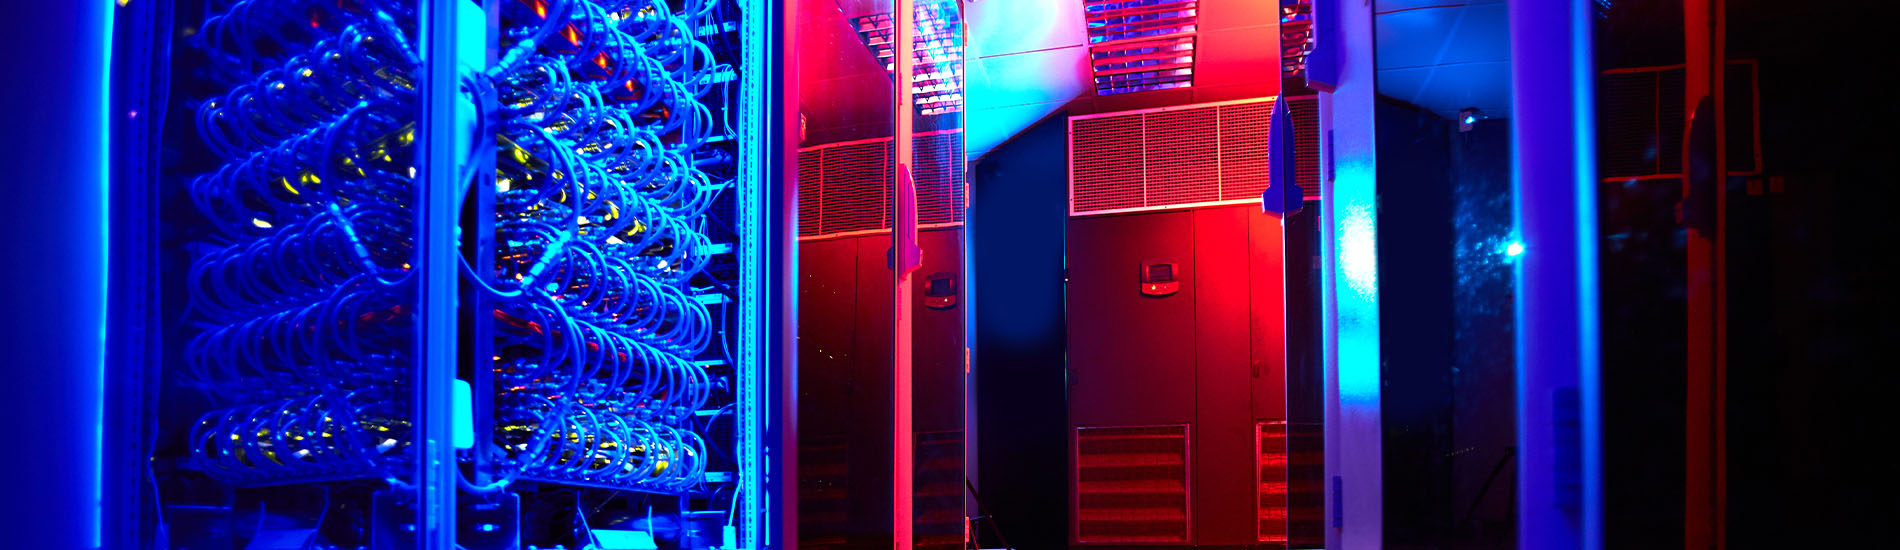 general-picture-of-data-center-with-blue-and-red-ambiance-lighting